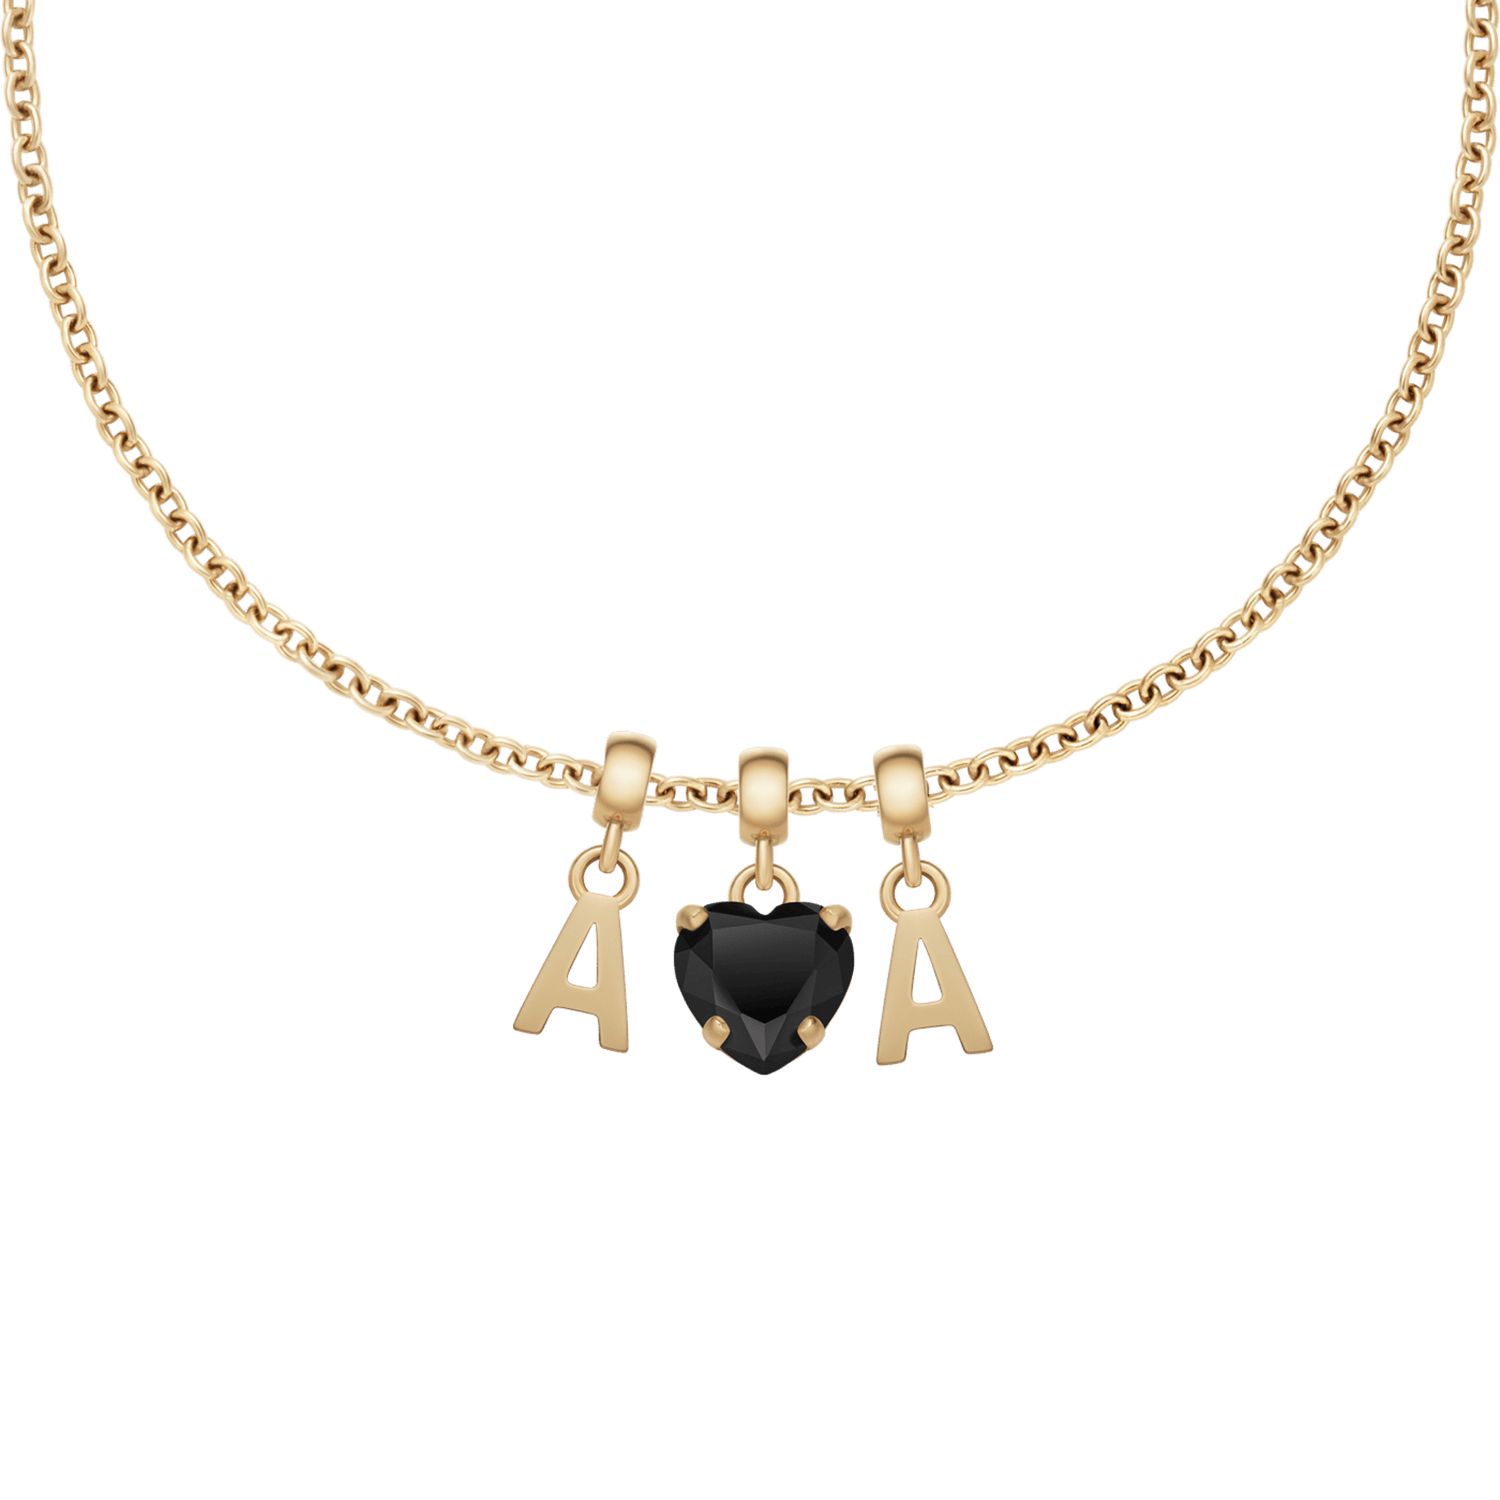 2 charm letters, 1 black heart on a chain necklace